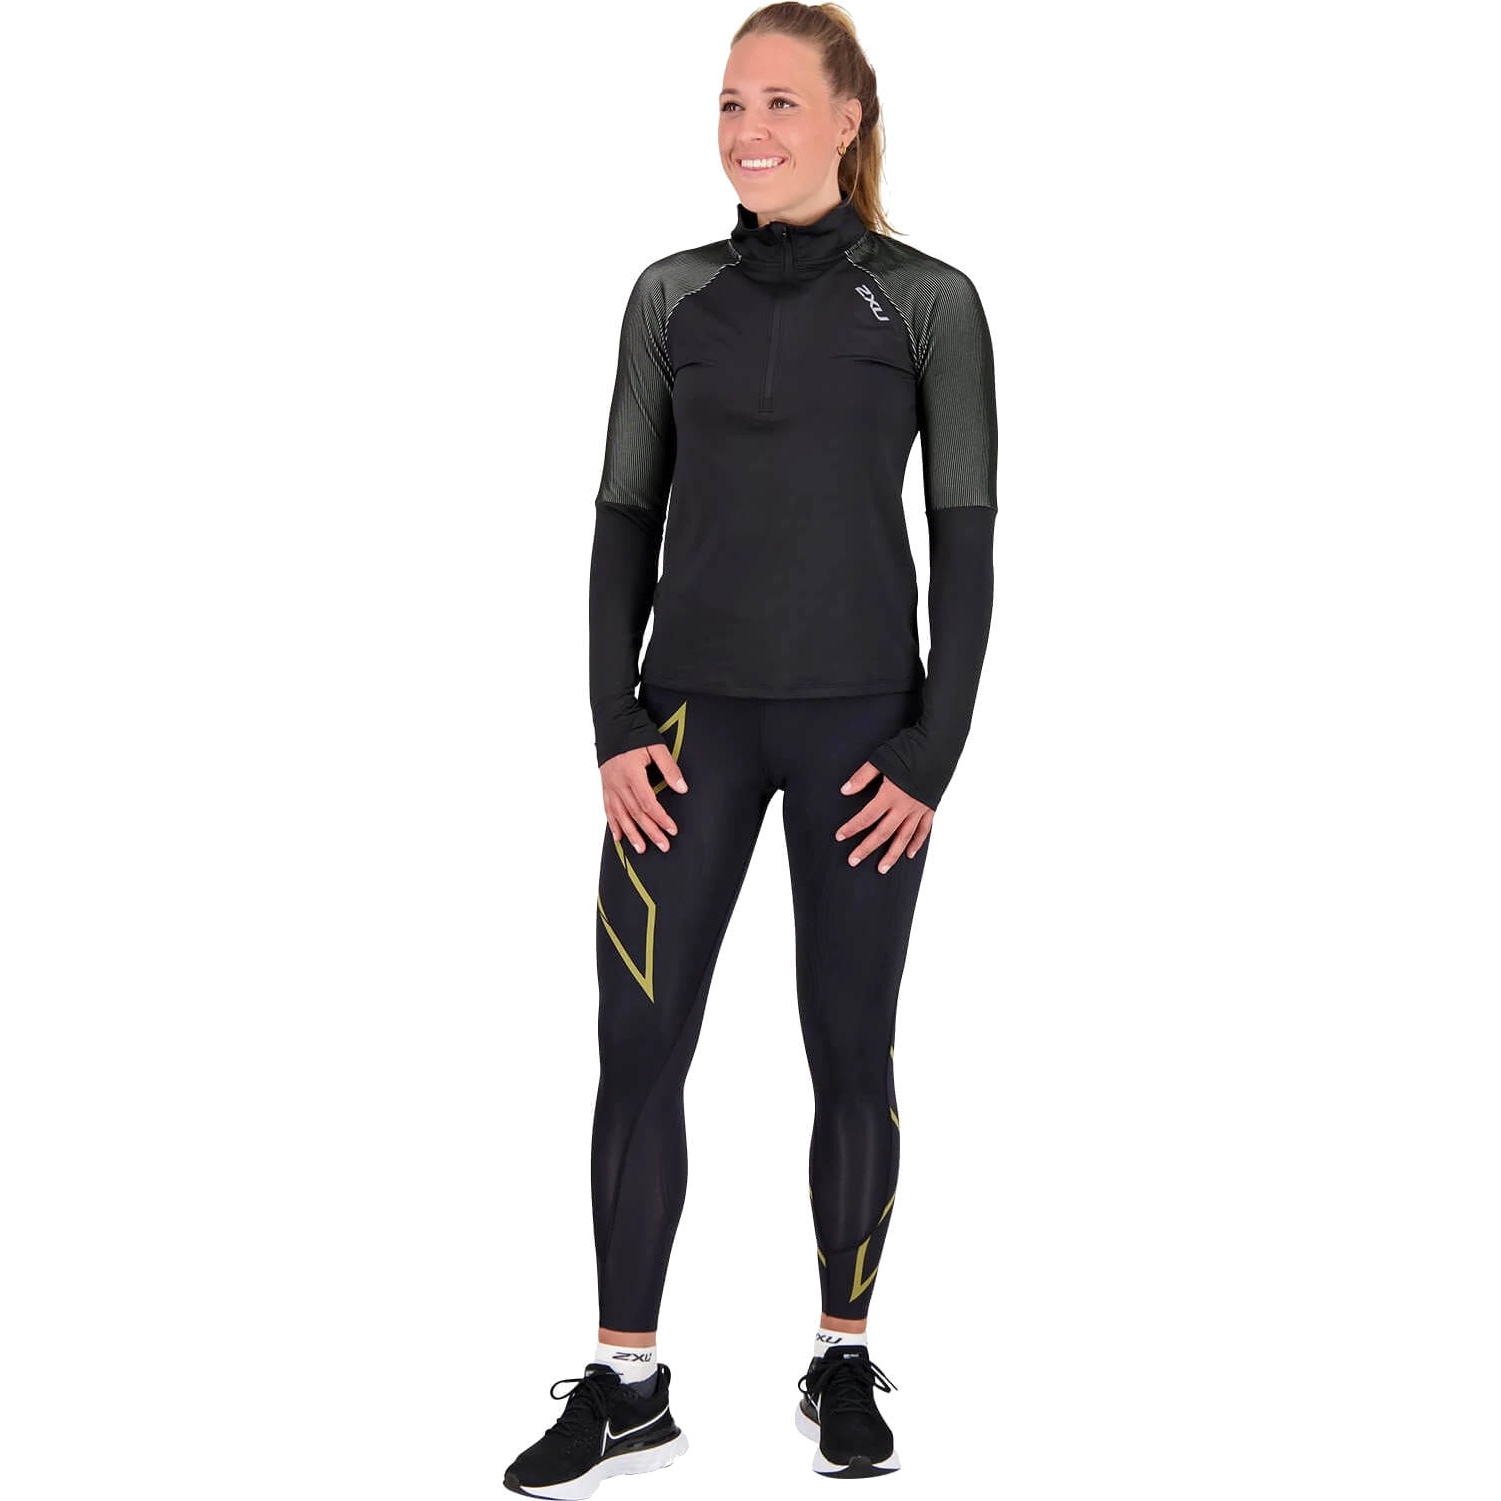 Women's 2XU Light Speed Mid-Rise Compression Tights